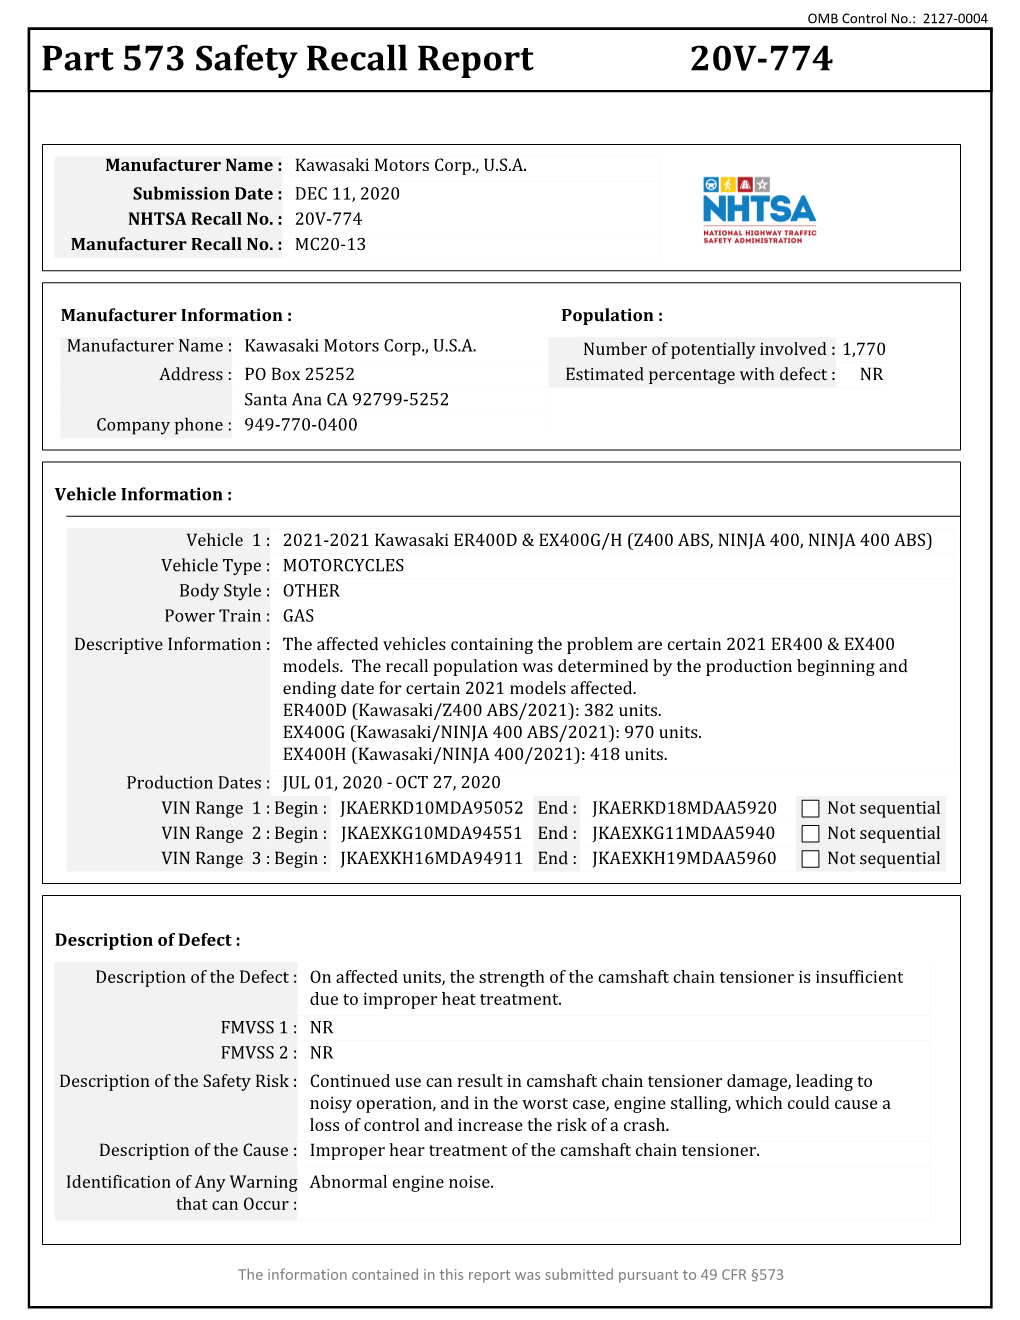 Part 573 Safety Recall Report 20V-774